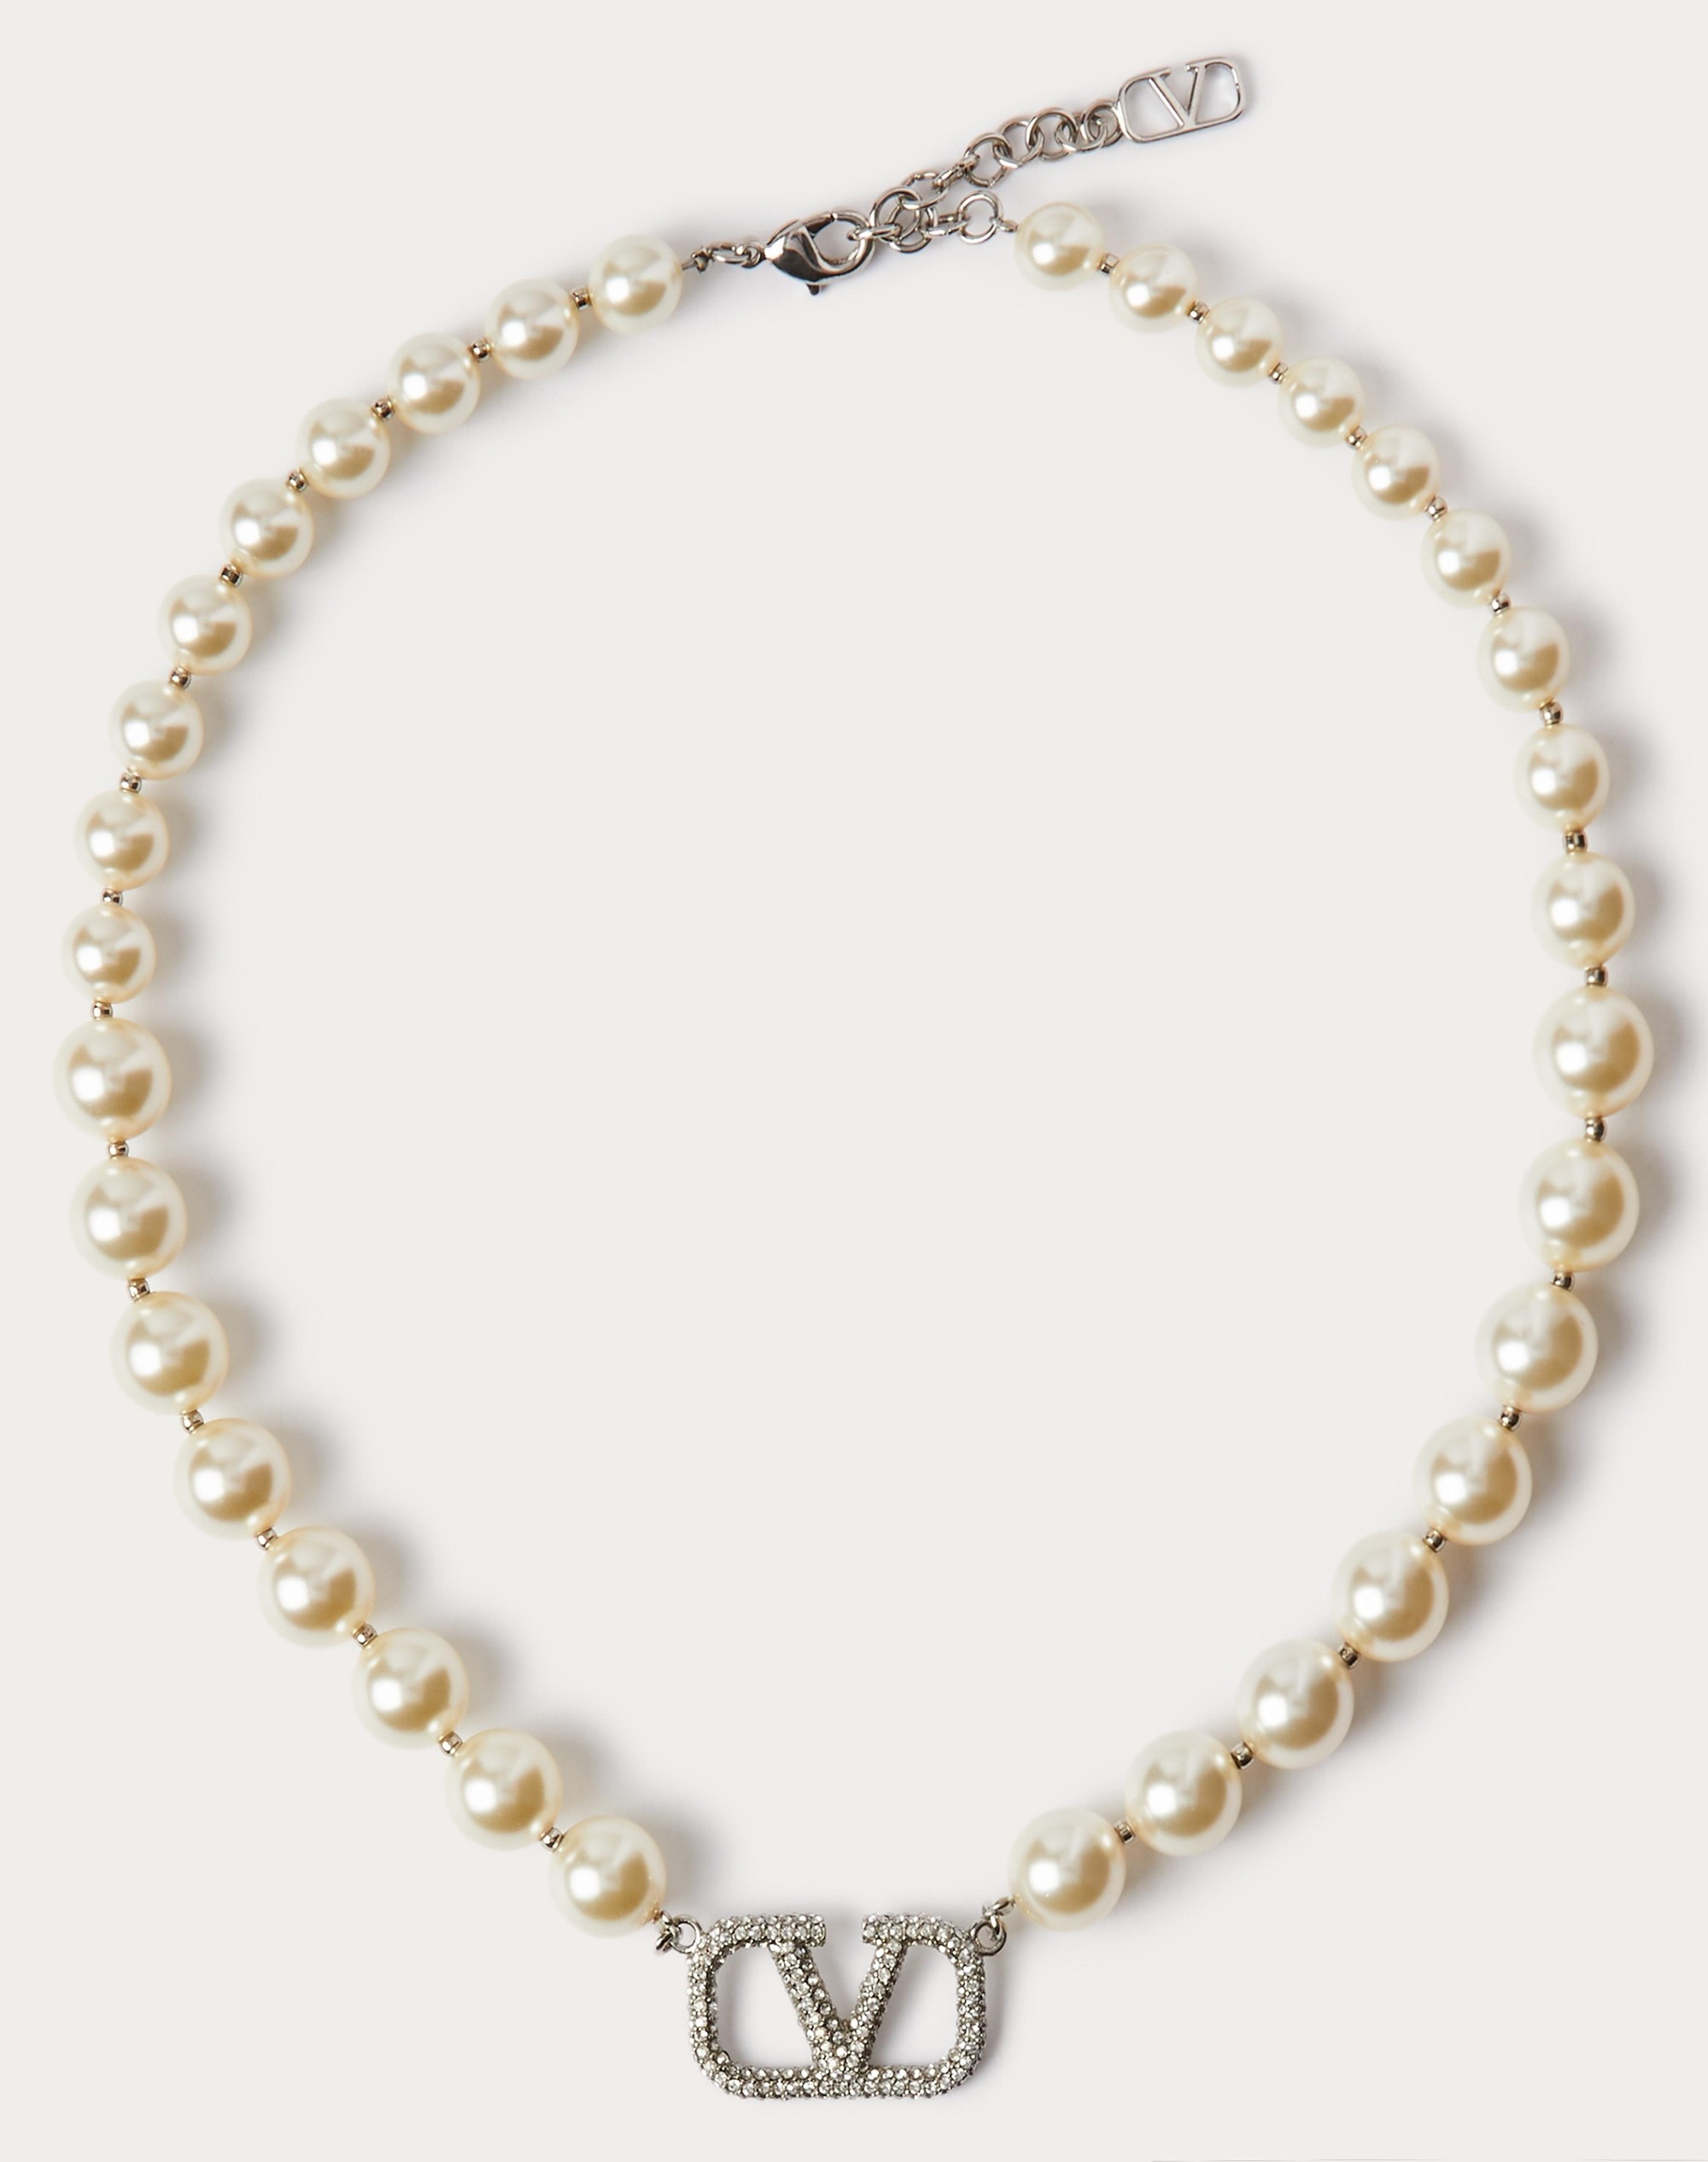 VLOGO SIGNATURE NECKLACE WITH PEARLS AND SWAROVSKI® CRYSTALS - 1